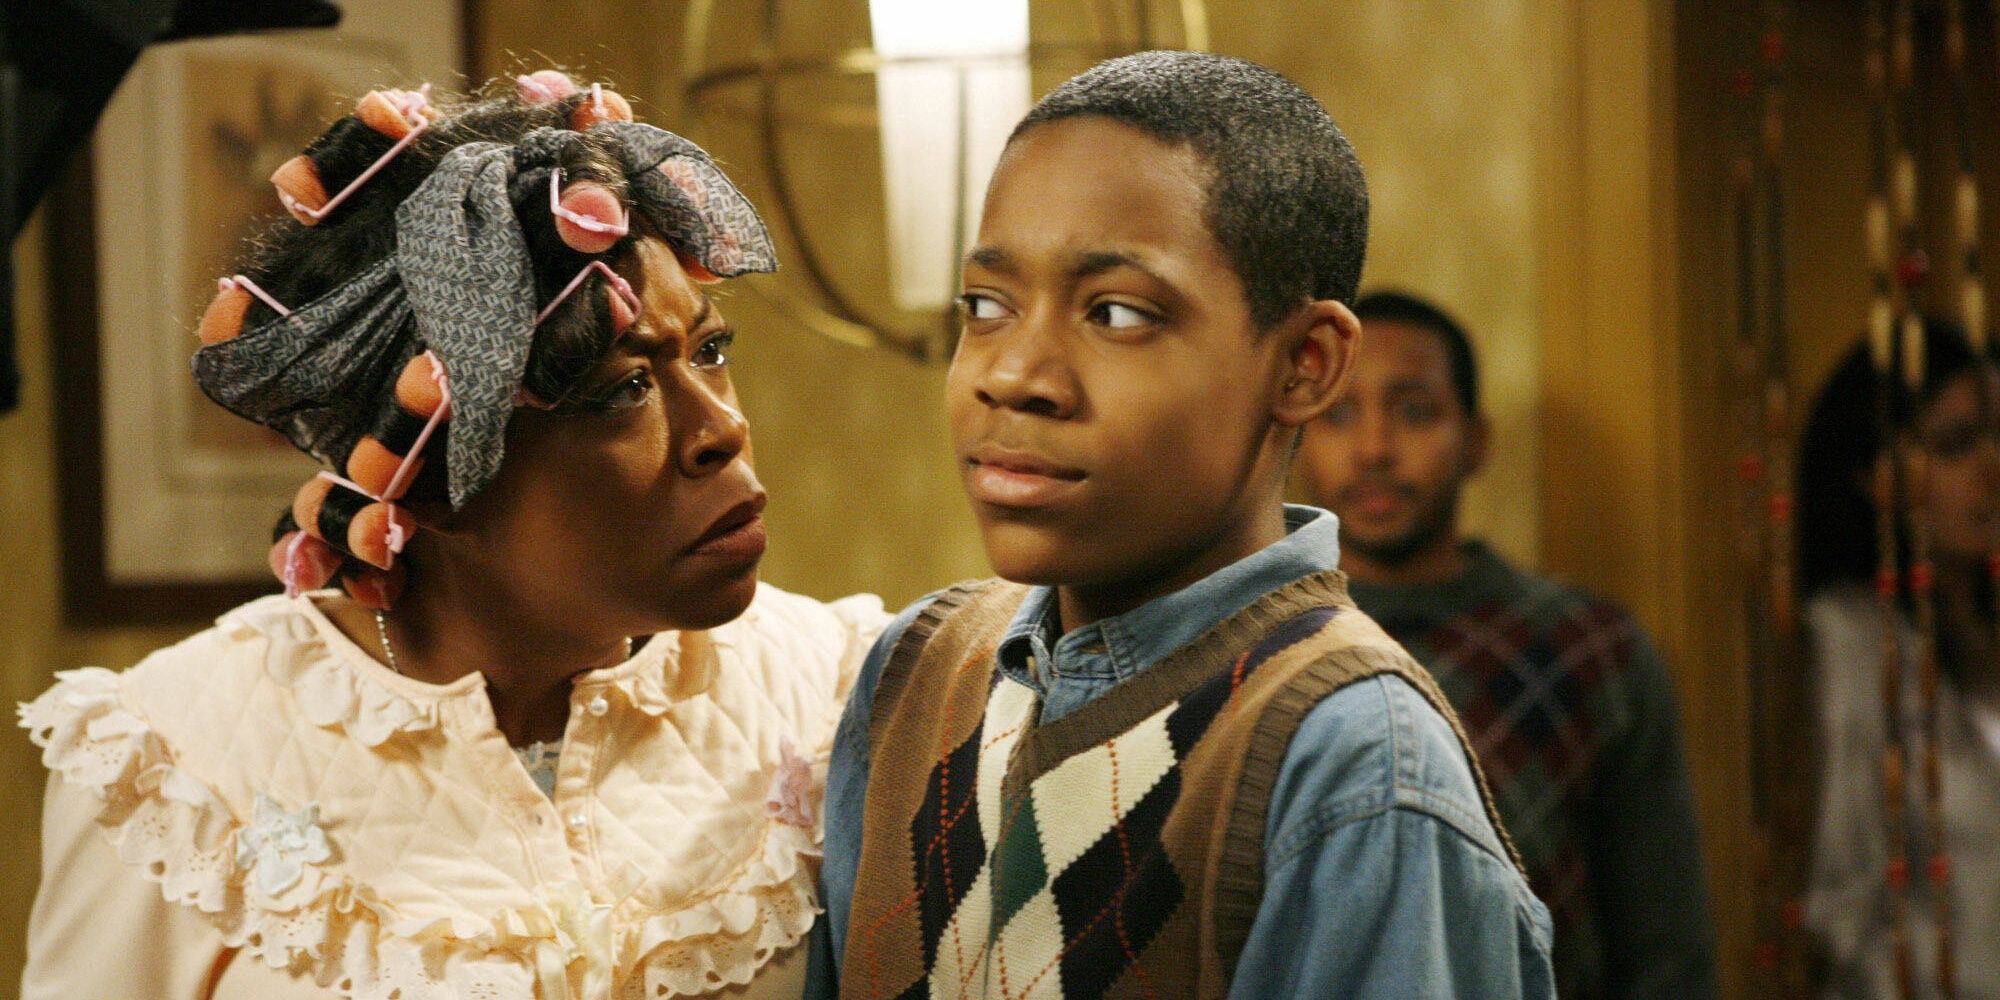 Chris being scolded by his mother in Everybody Hates Chris.